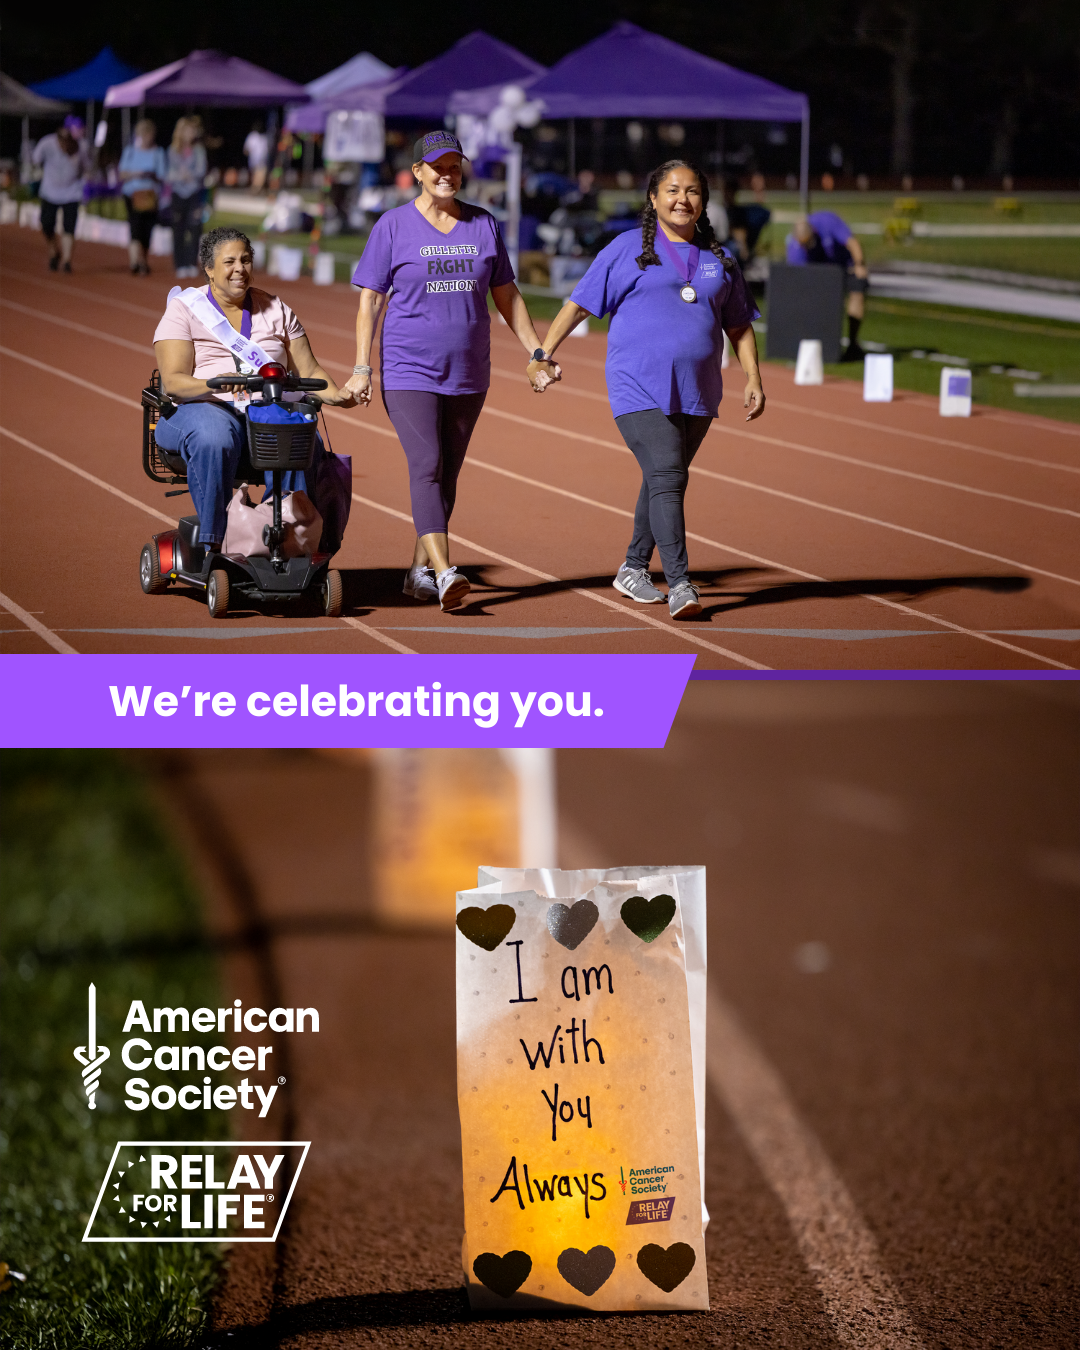 Survivors motivate and inspire us all. Join us at
RelayForLife.org/EVENTNAME to show your support for
all those fighting against cancer.
#RelayForLifeEVENTNAME